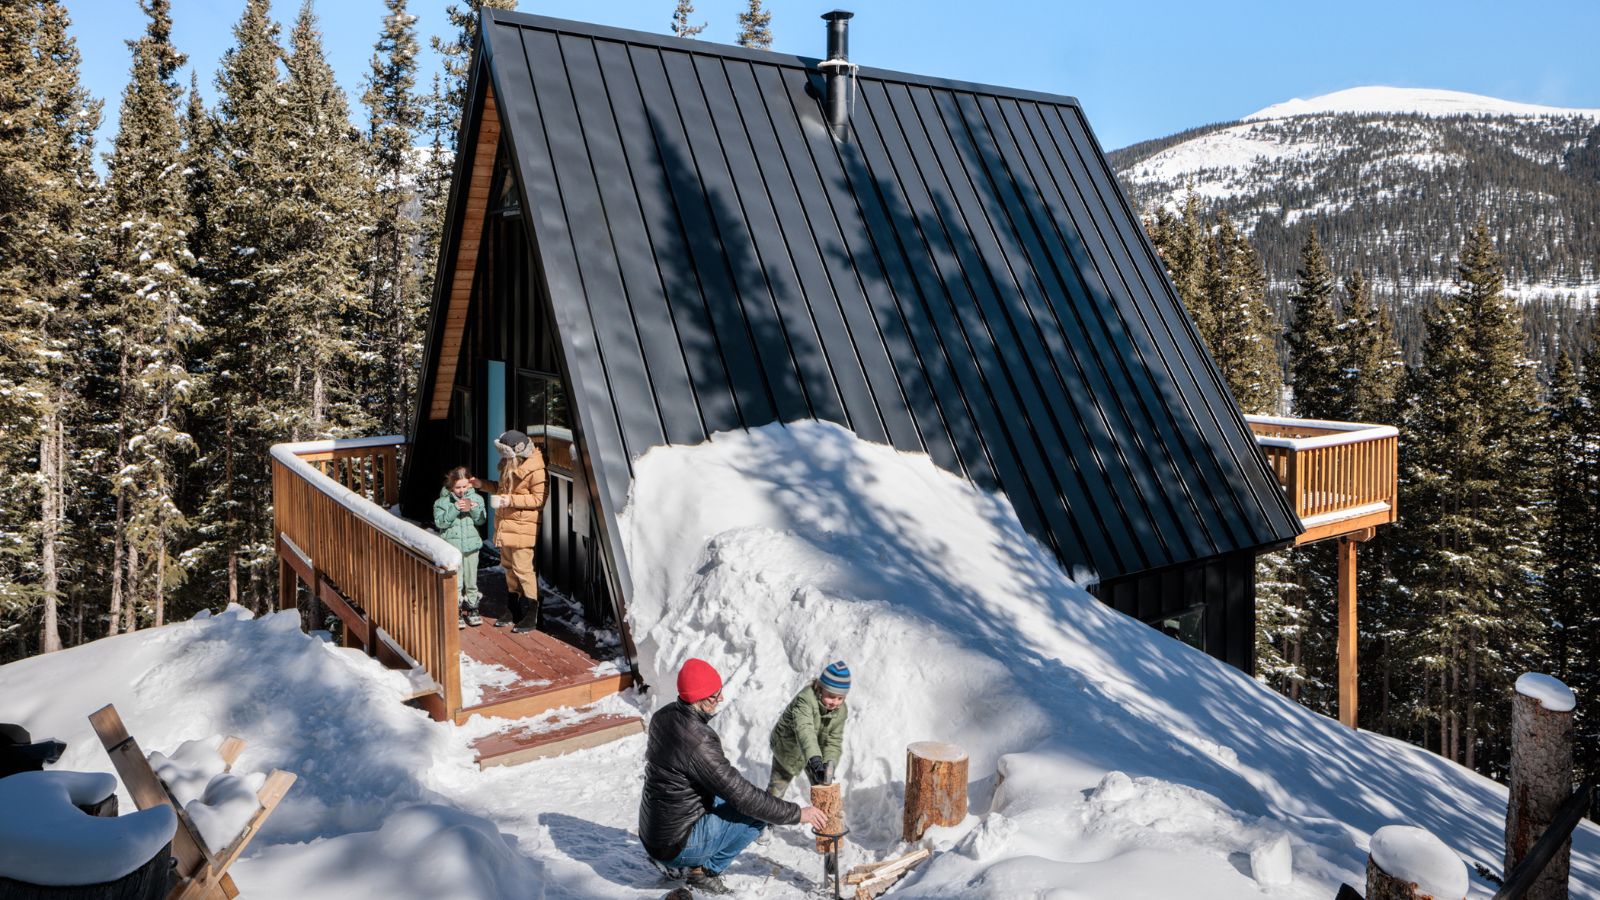 How to furnish a mountain chalet,  